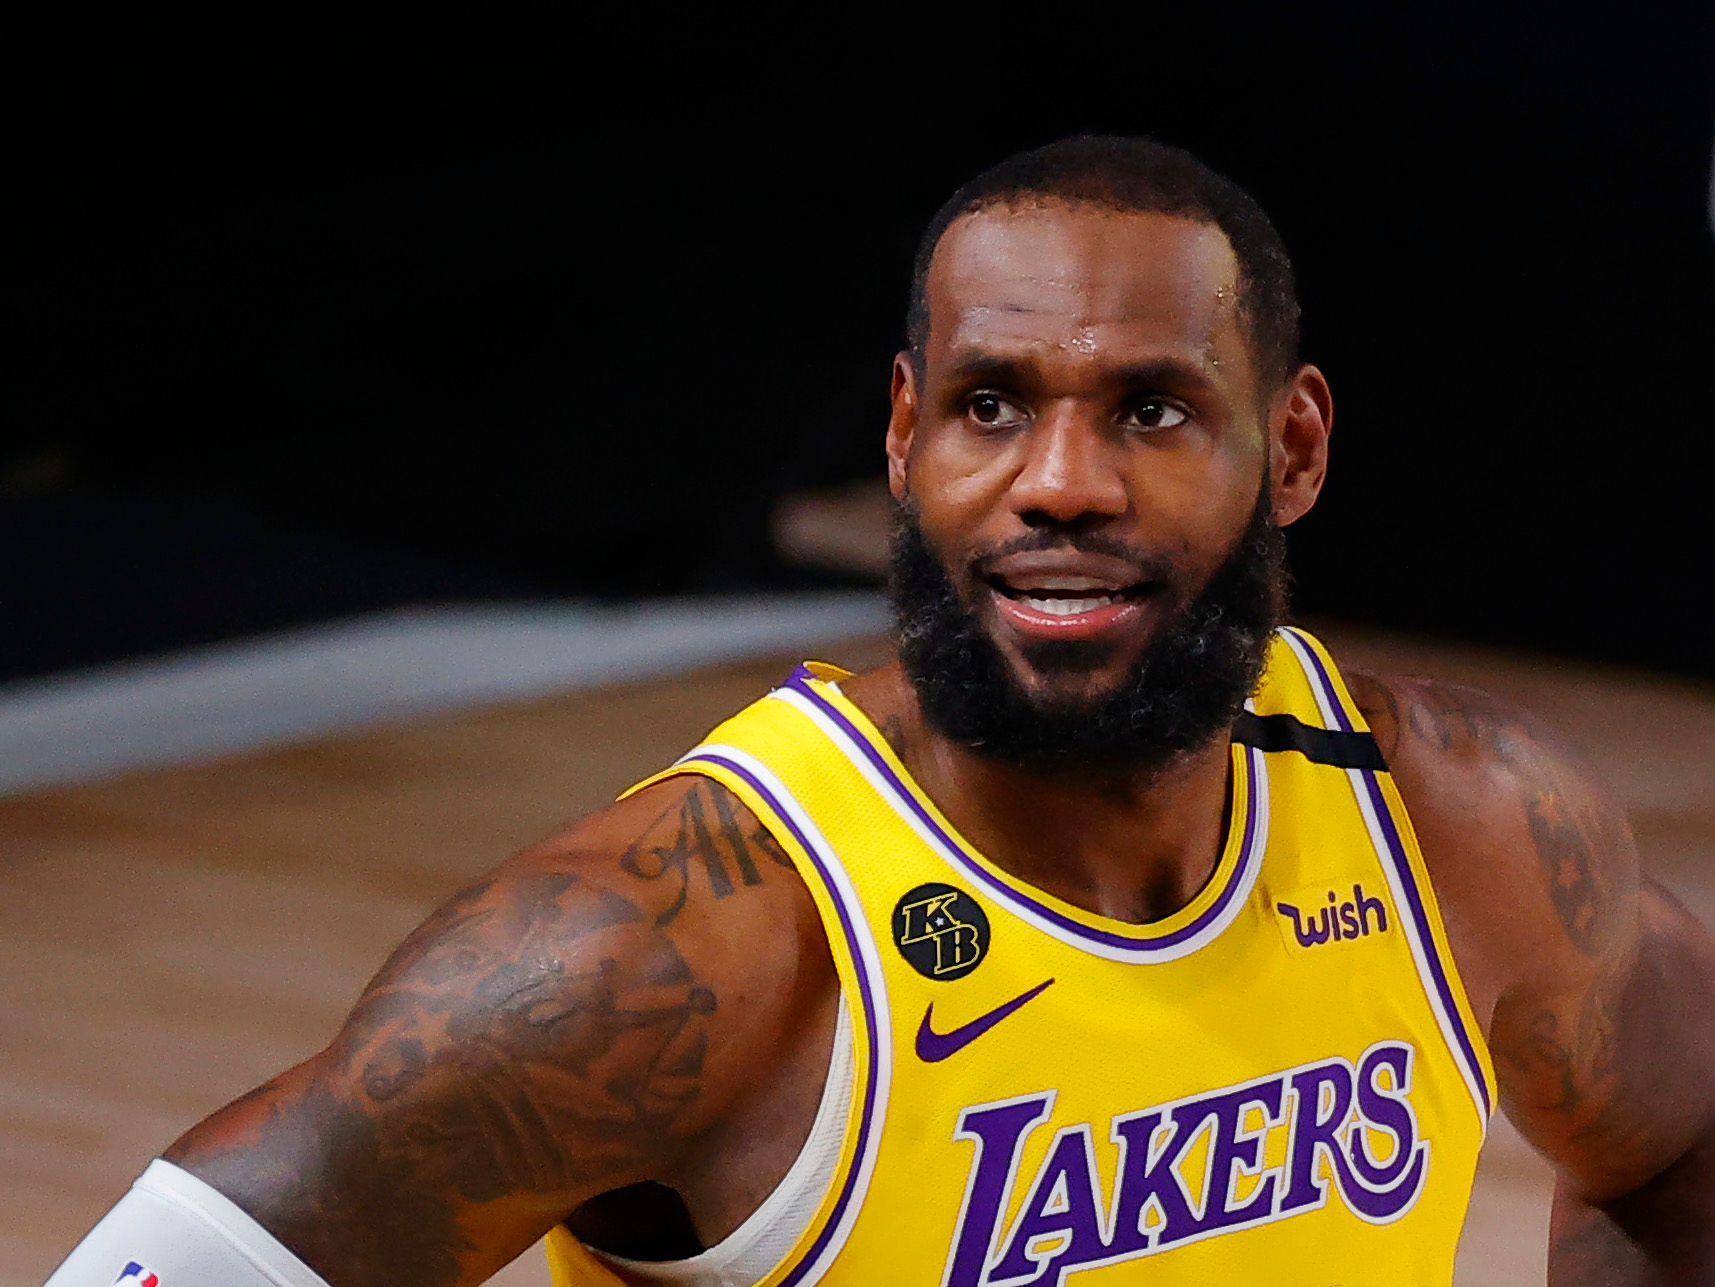 NBA star LeBron James, team Los Angeles Lakers top jersey sales in Philippines